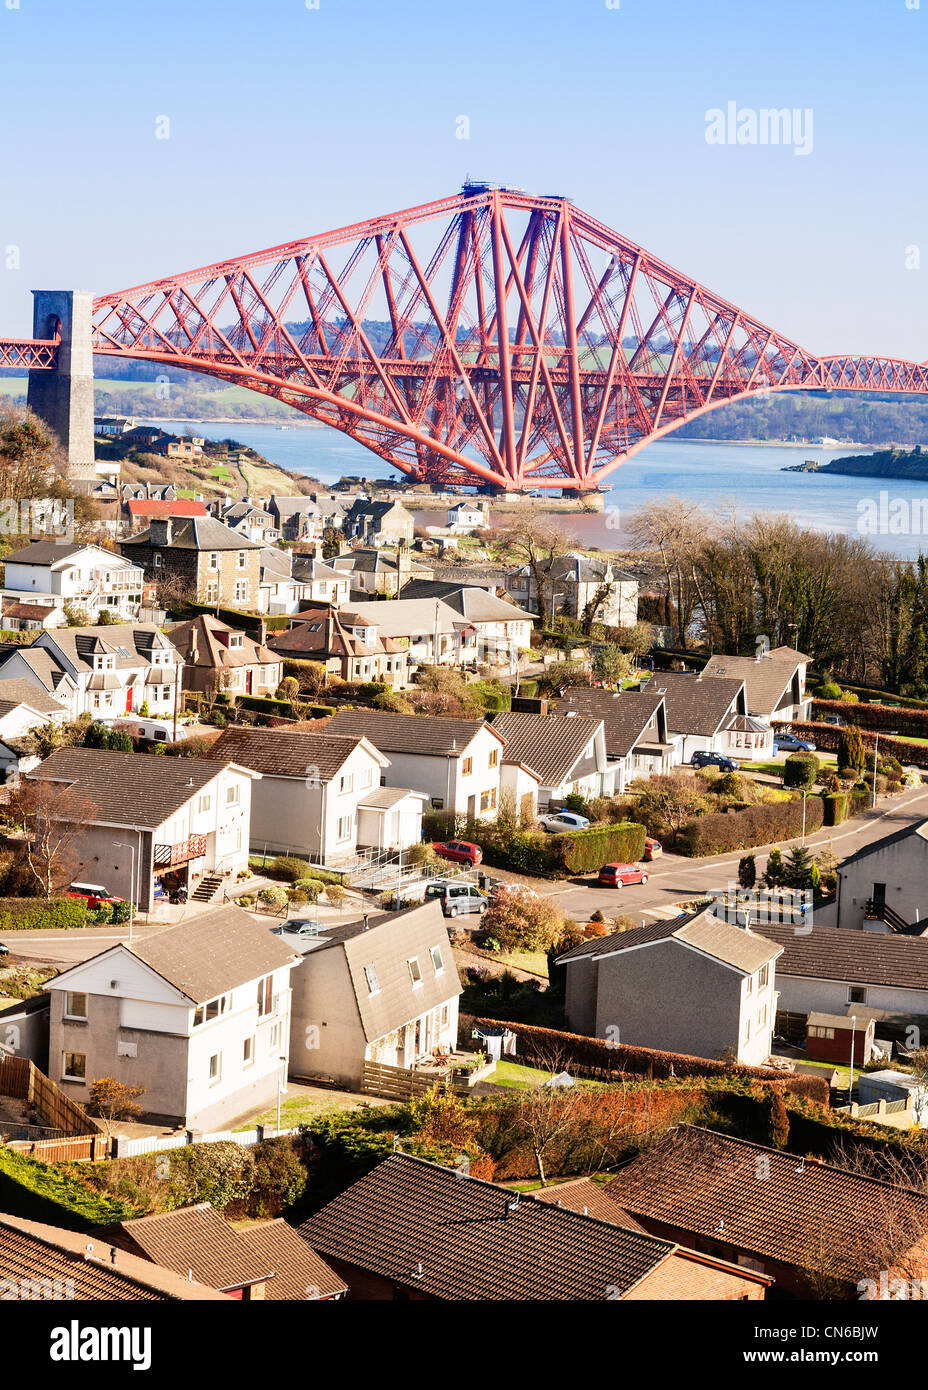 The Forth rail bridge looking over, North Queensferry, Fife, Scotland. Stock Photo